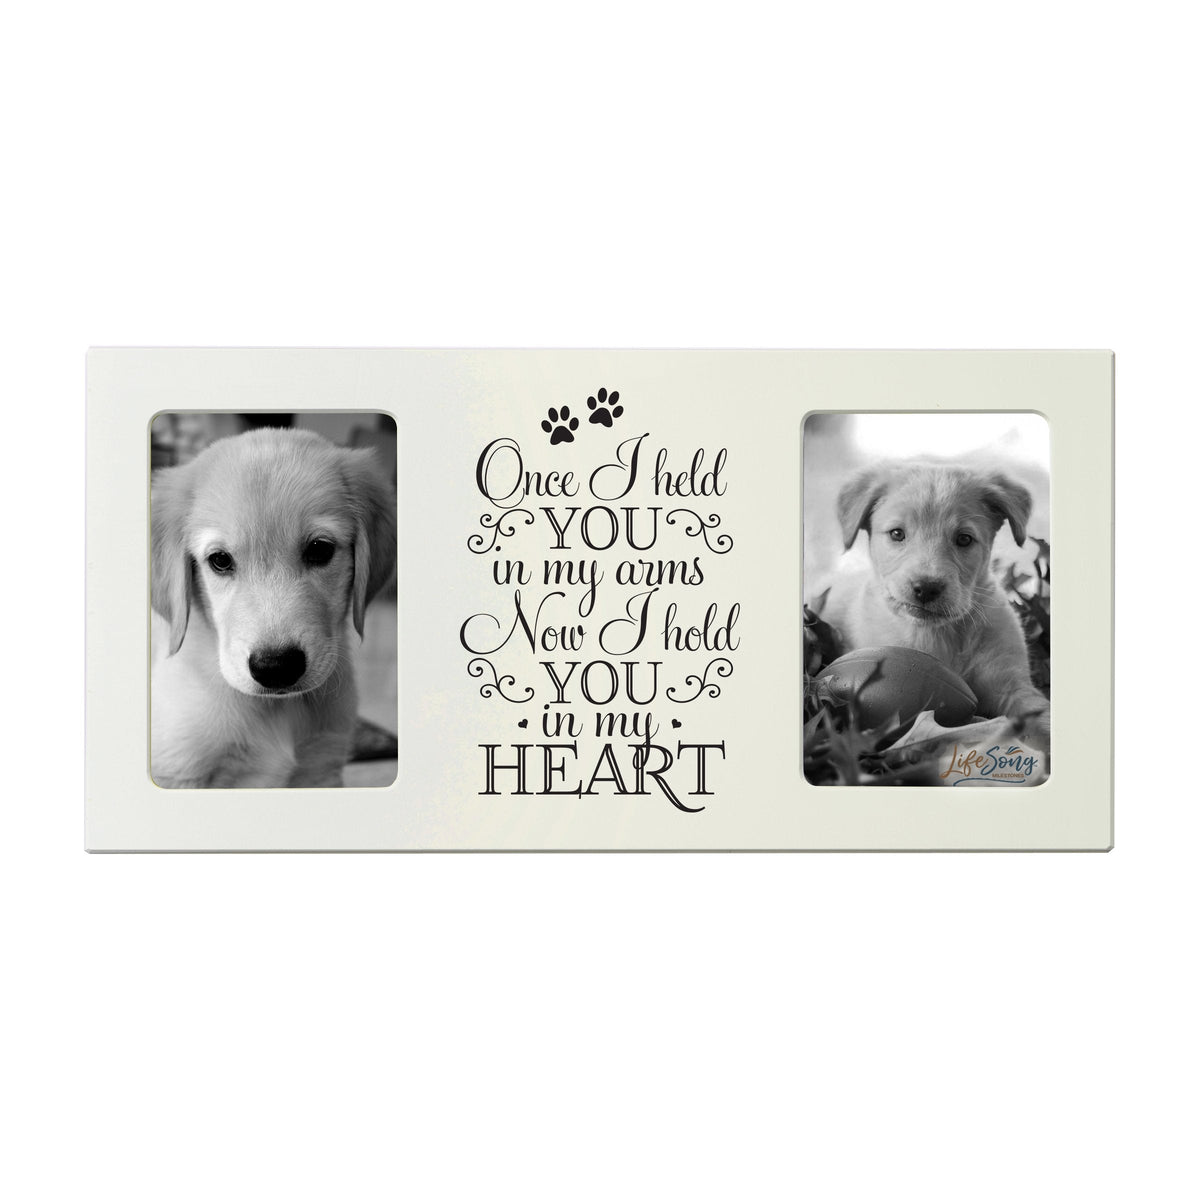 Ivory Pet Memorial Double 4x6 Picture Frame with phrase &quot;Once I Held You&quot;